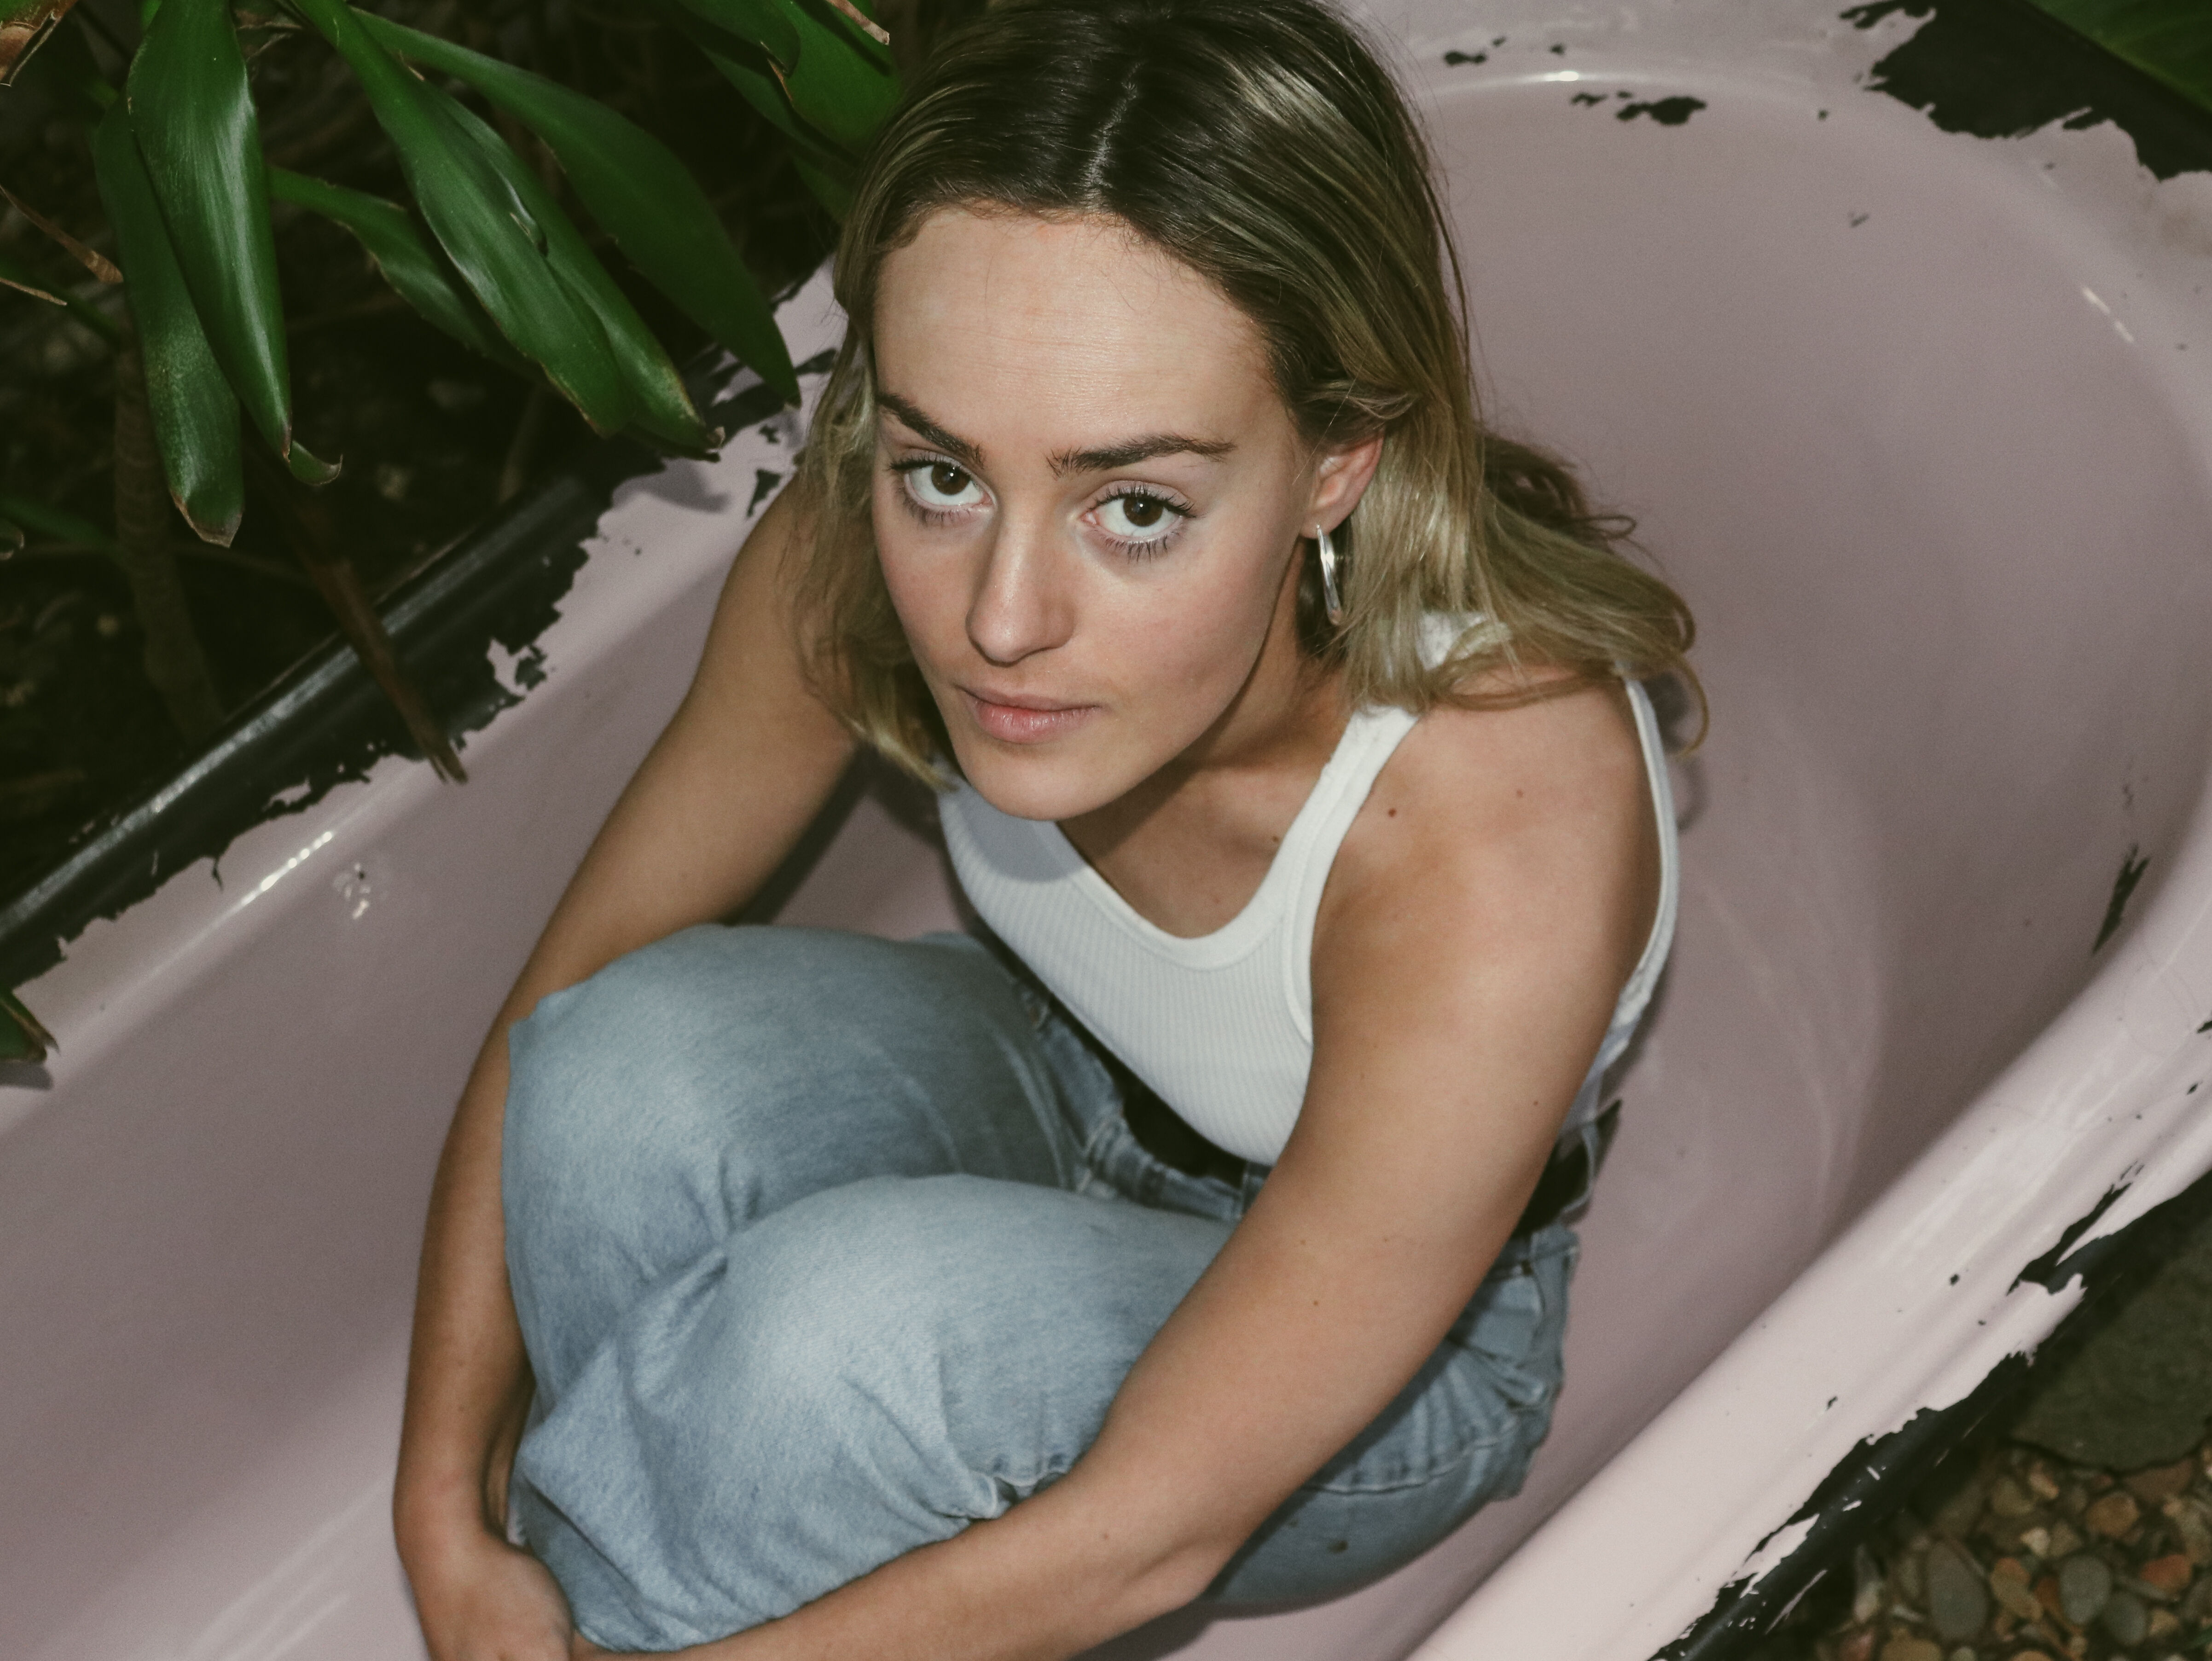 A young woman with blonde hair sits thoughtfully in an empty bathtub, surrounded by green foliage.